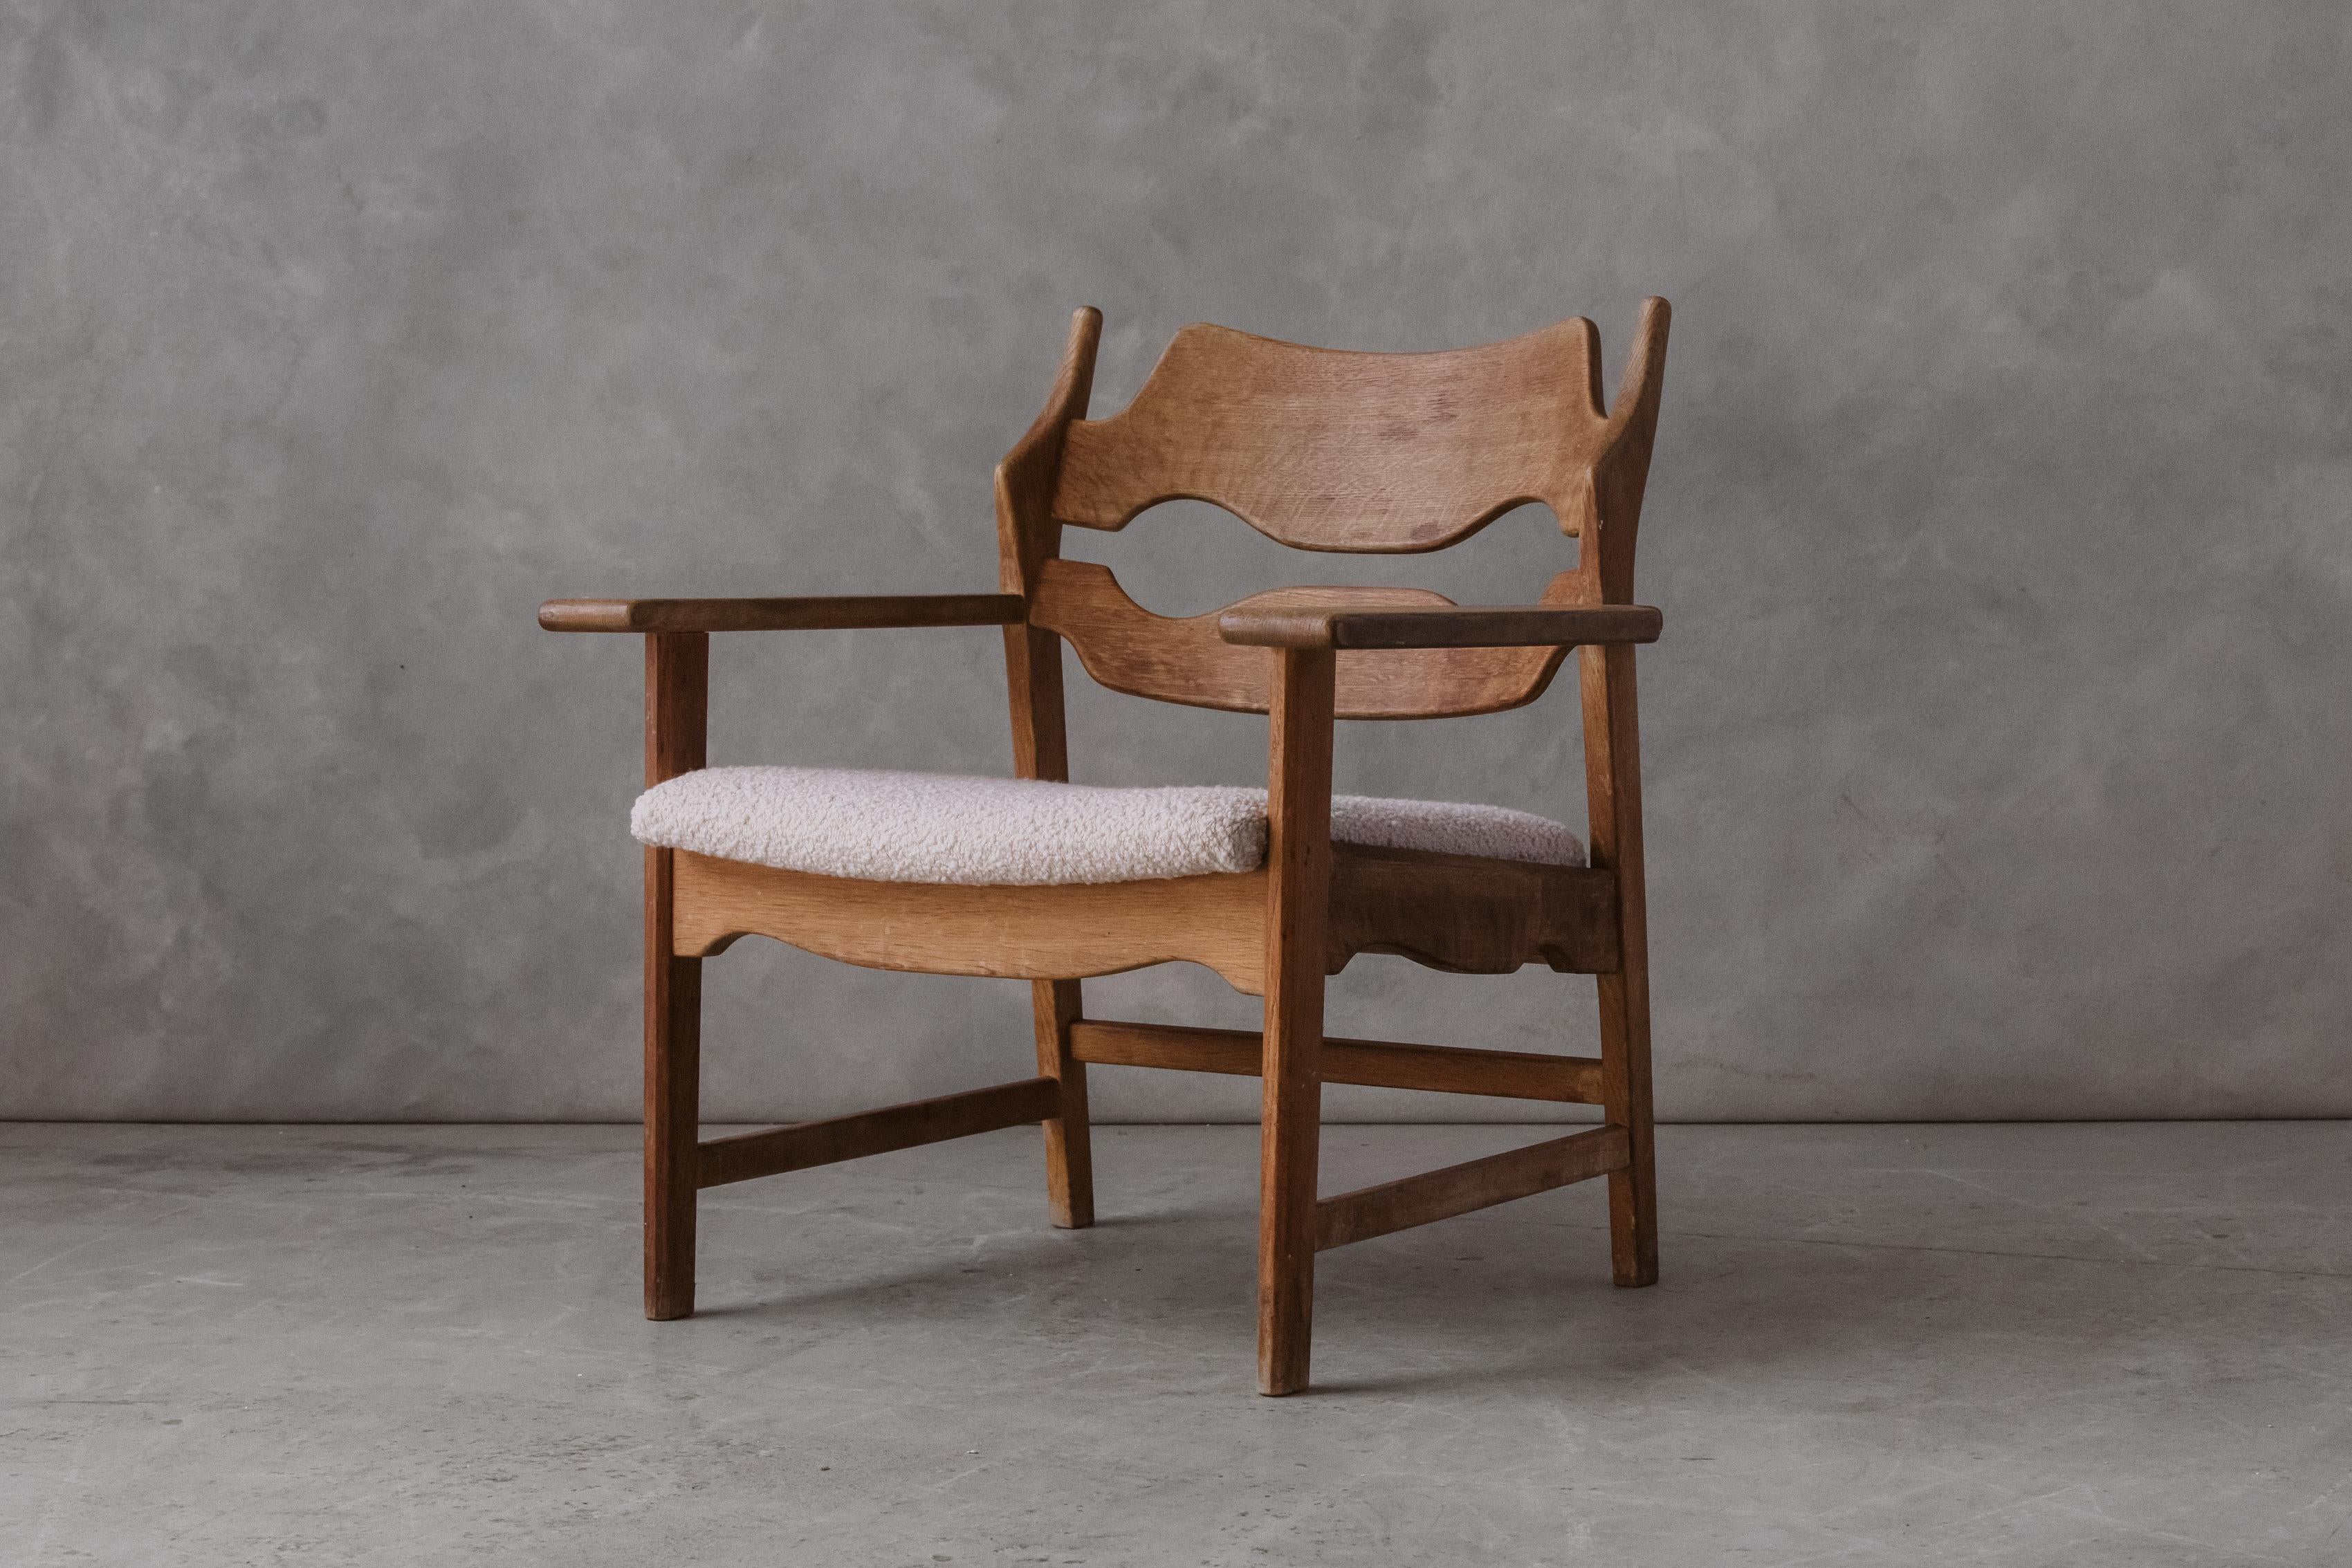 Vintage Razor Lounge Chair By Henning Kjærnulf, Denmark, circa 1970. Solid oak construction. Later upholstered seat in off white bouclé.